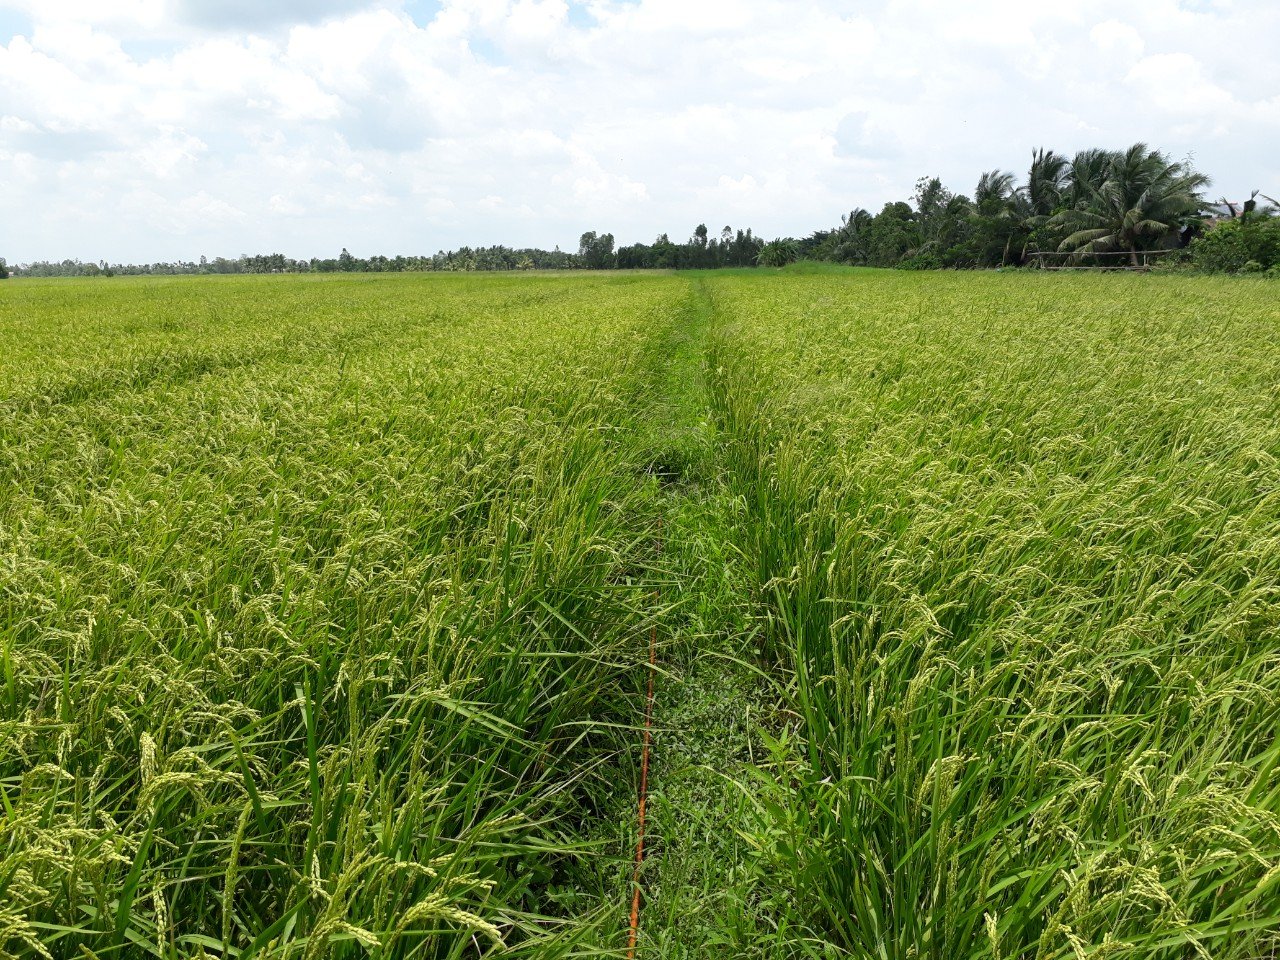 Project Estimation of greenhouse gas emissions on the current status of organic rice cultivation - A case study in Vung Liem district, Vinh Long province